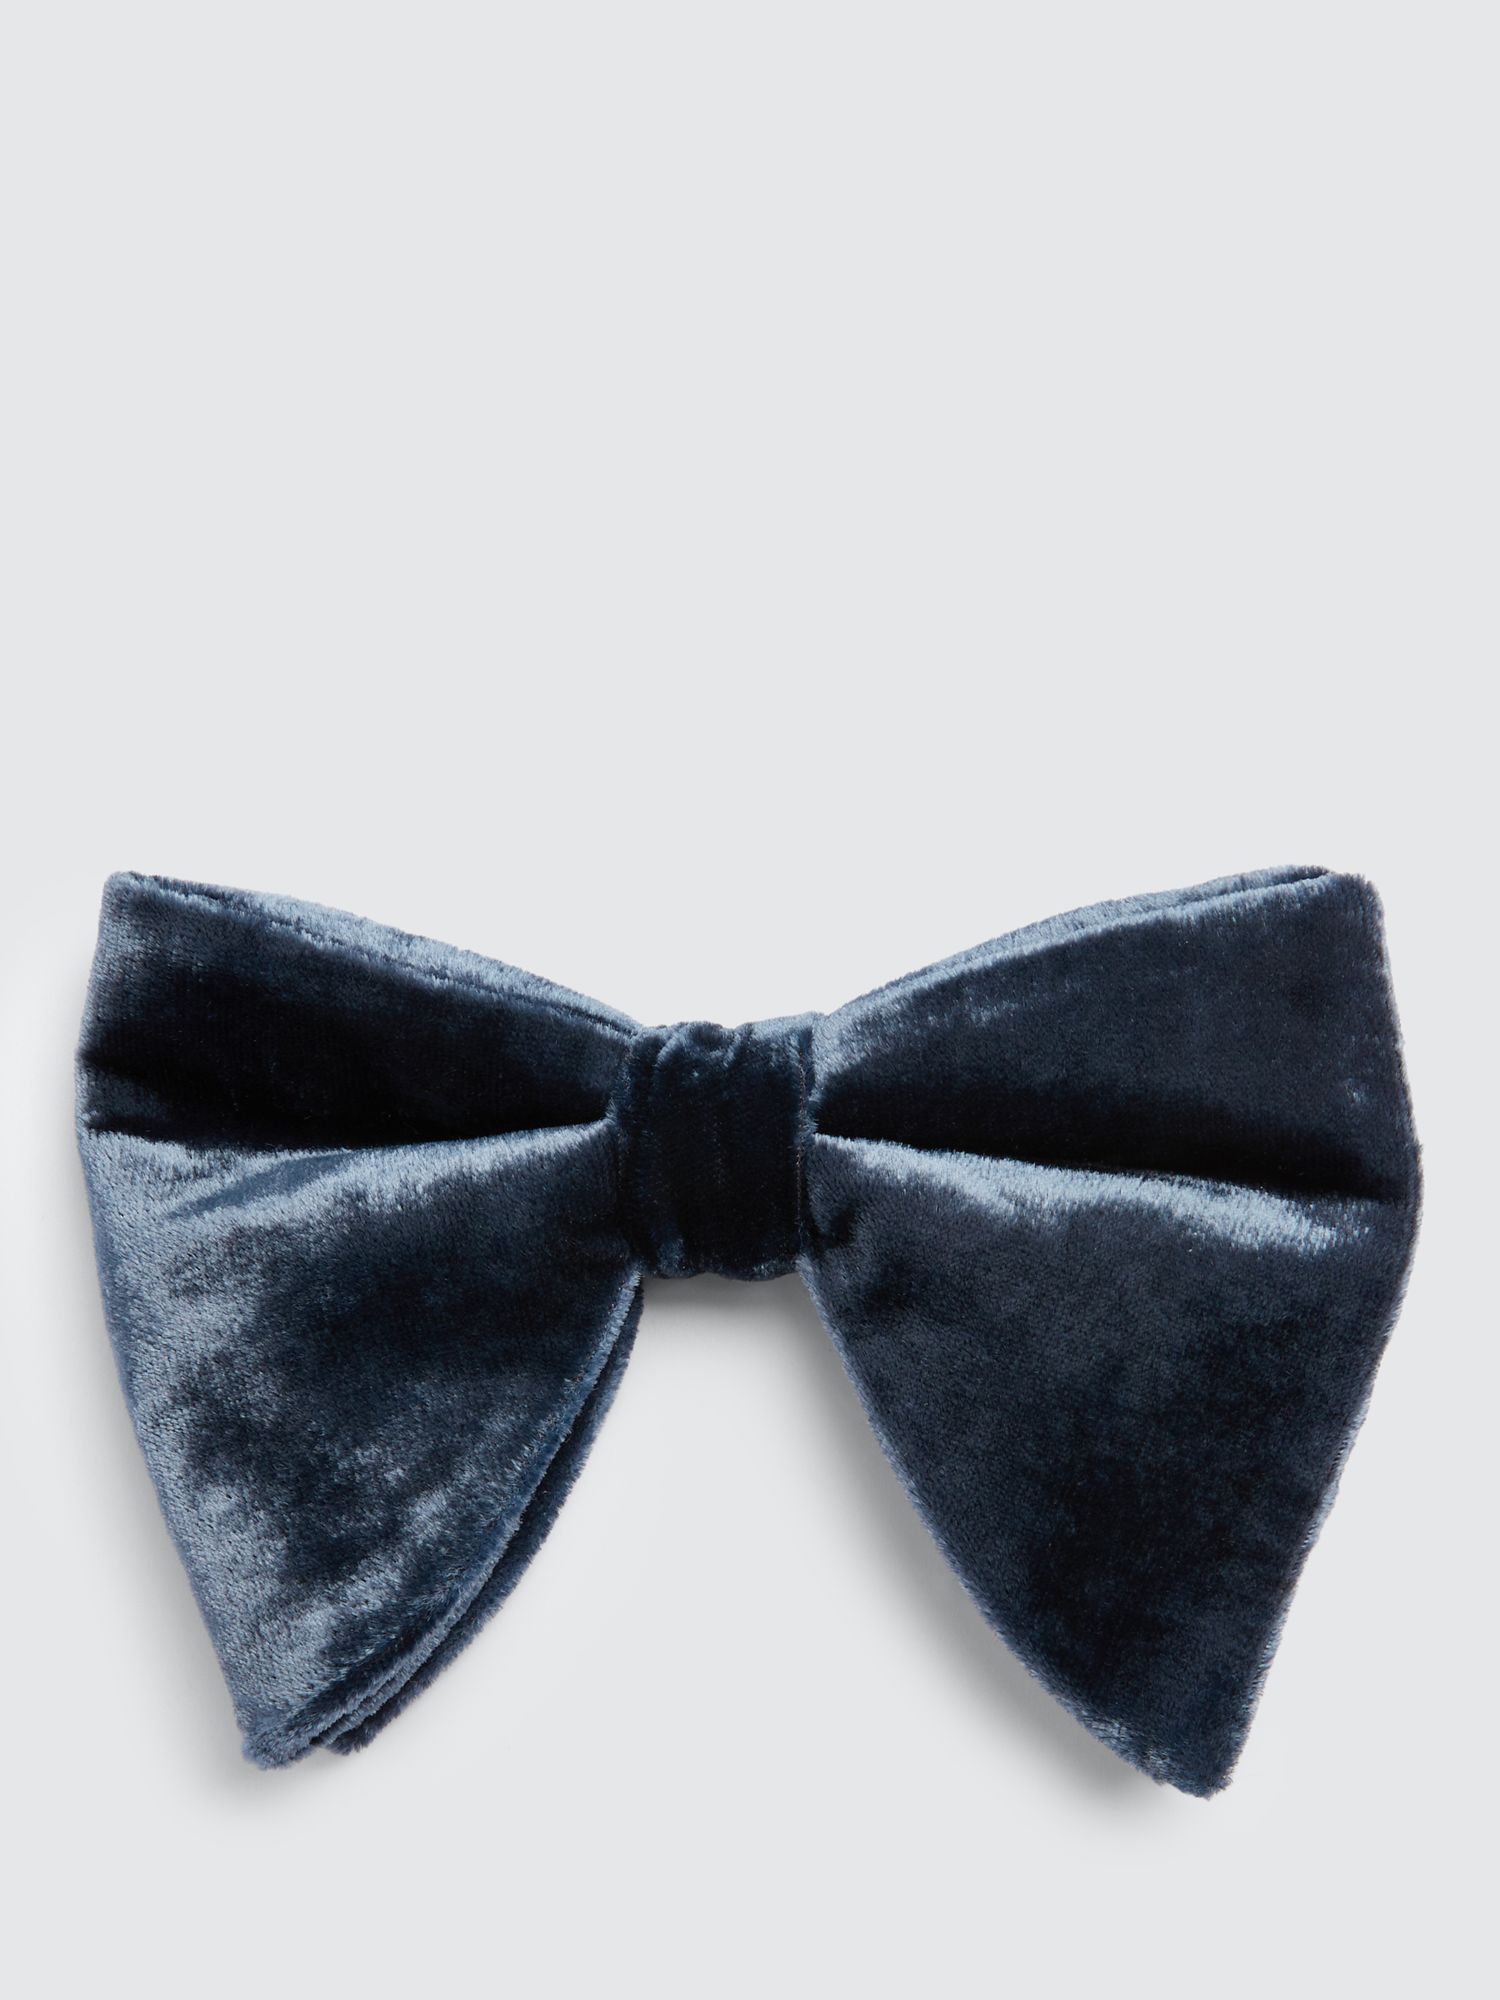 Compare prices for LV Gardening Bow Tie (MP2613) in official stores